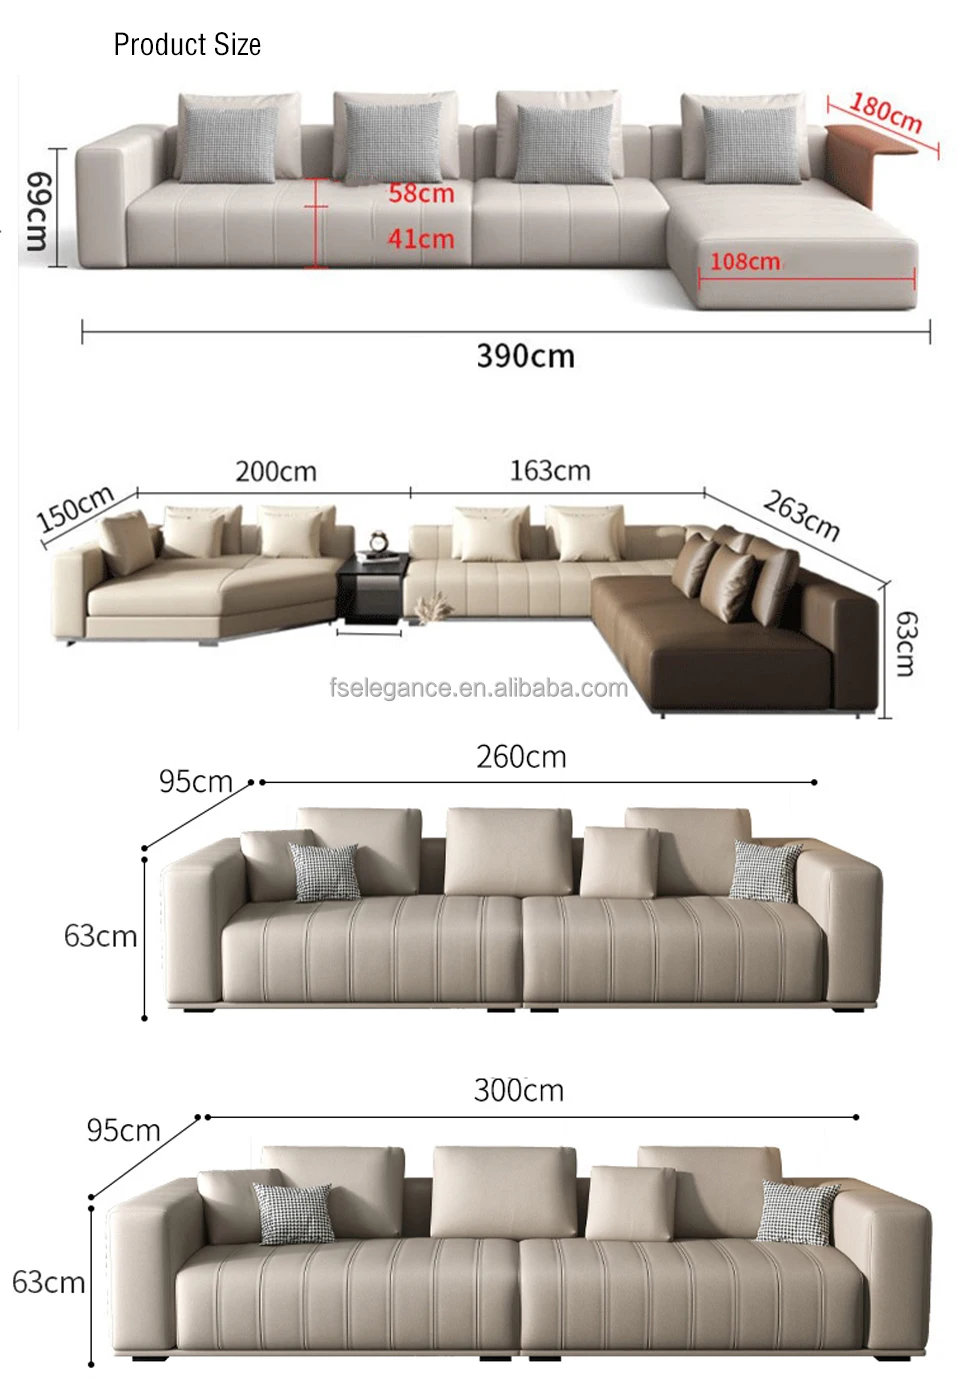 2022 designs feather lazy floor couch covers double seat leather sofa modern seats living room corner sofa set